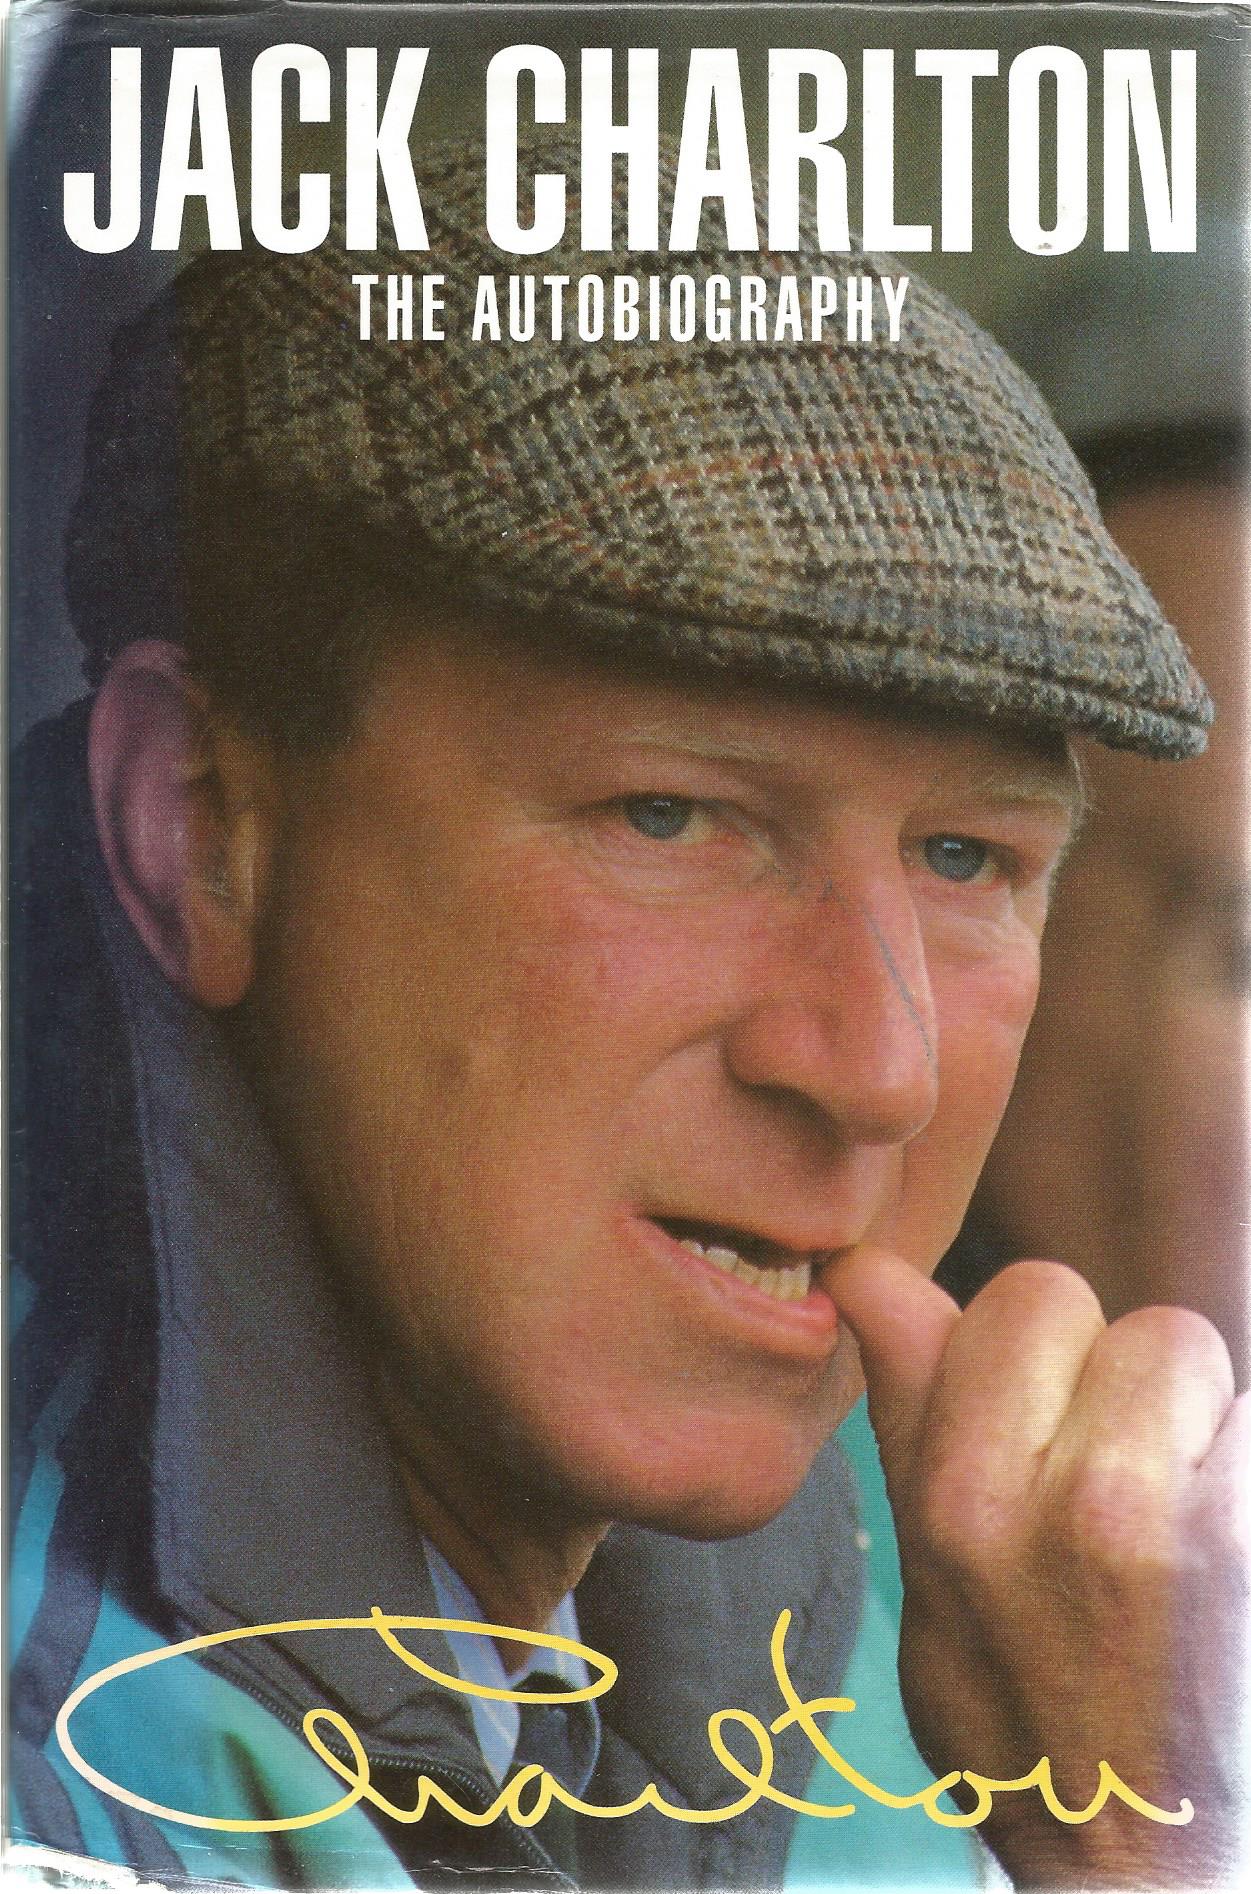 Football Jack Charlton hardback book The Autobiography signed inside by the England 1966 hero - Image 2 of 3